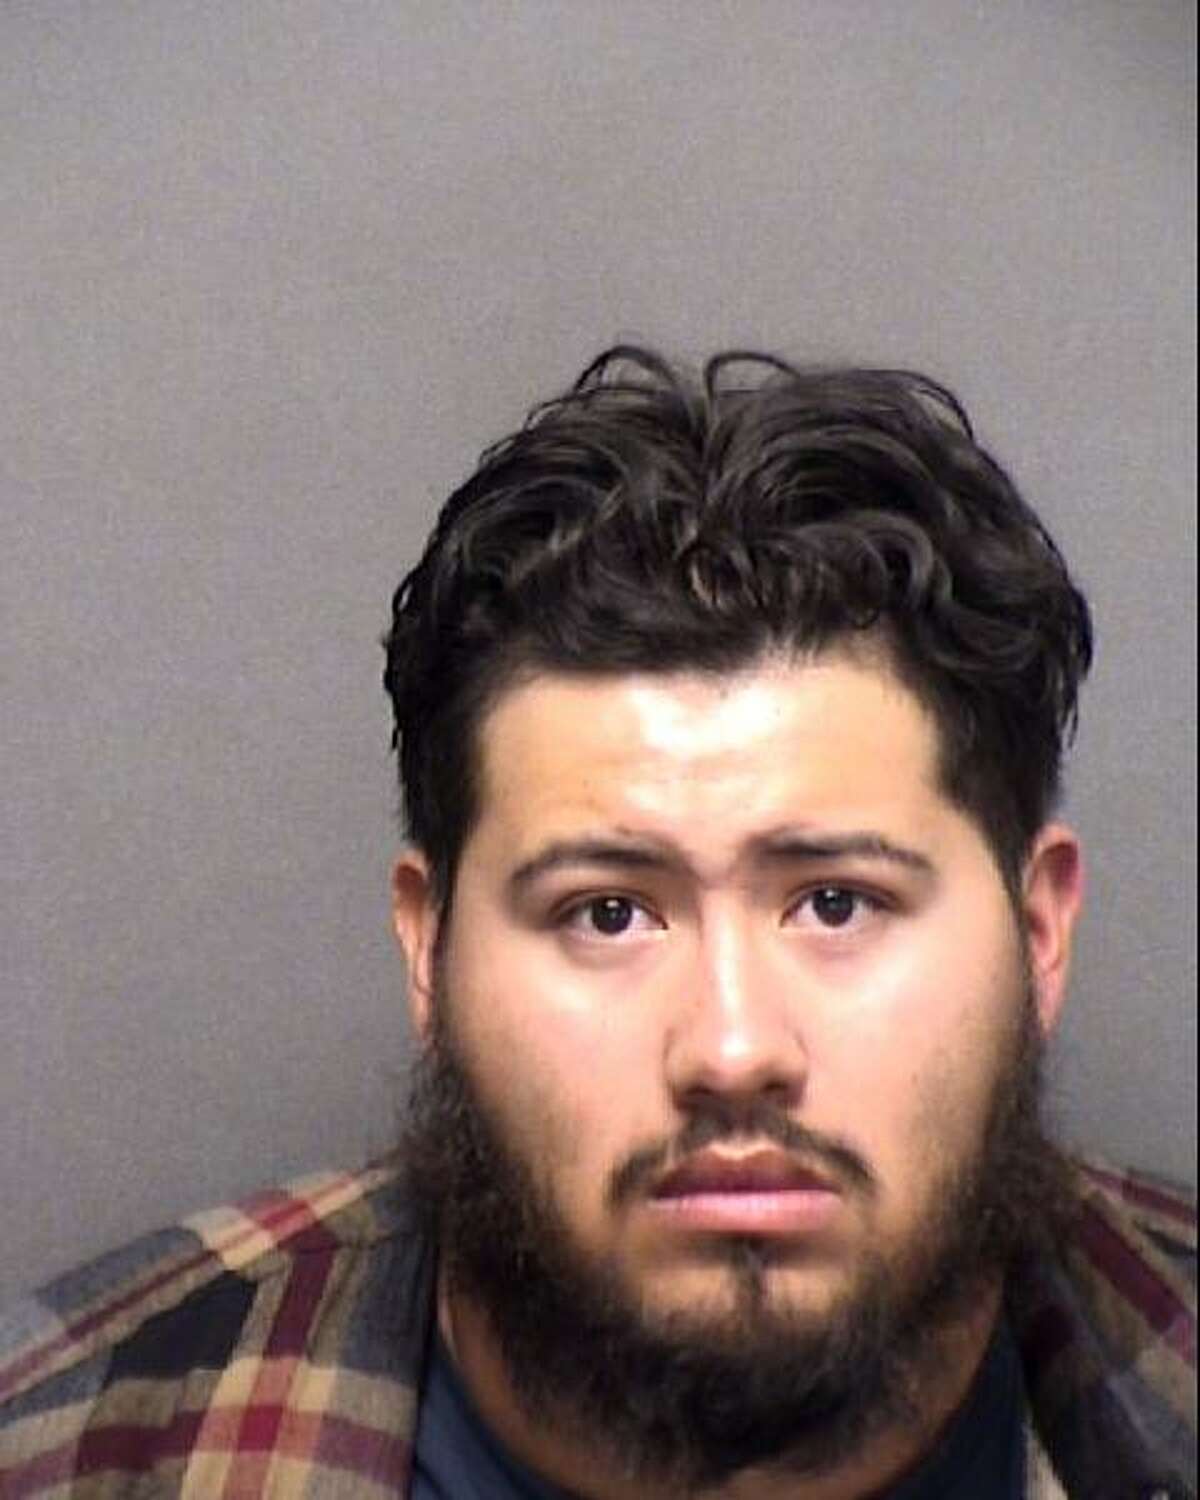 Fabian Anthony Lopez is charged with intoxication manslaughter in connection with the death of Robert Anthony Gutierrez on March 13, 2022.